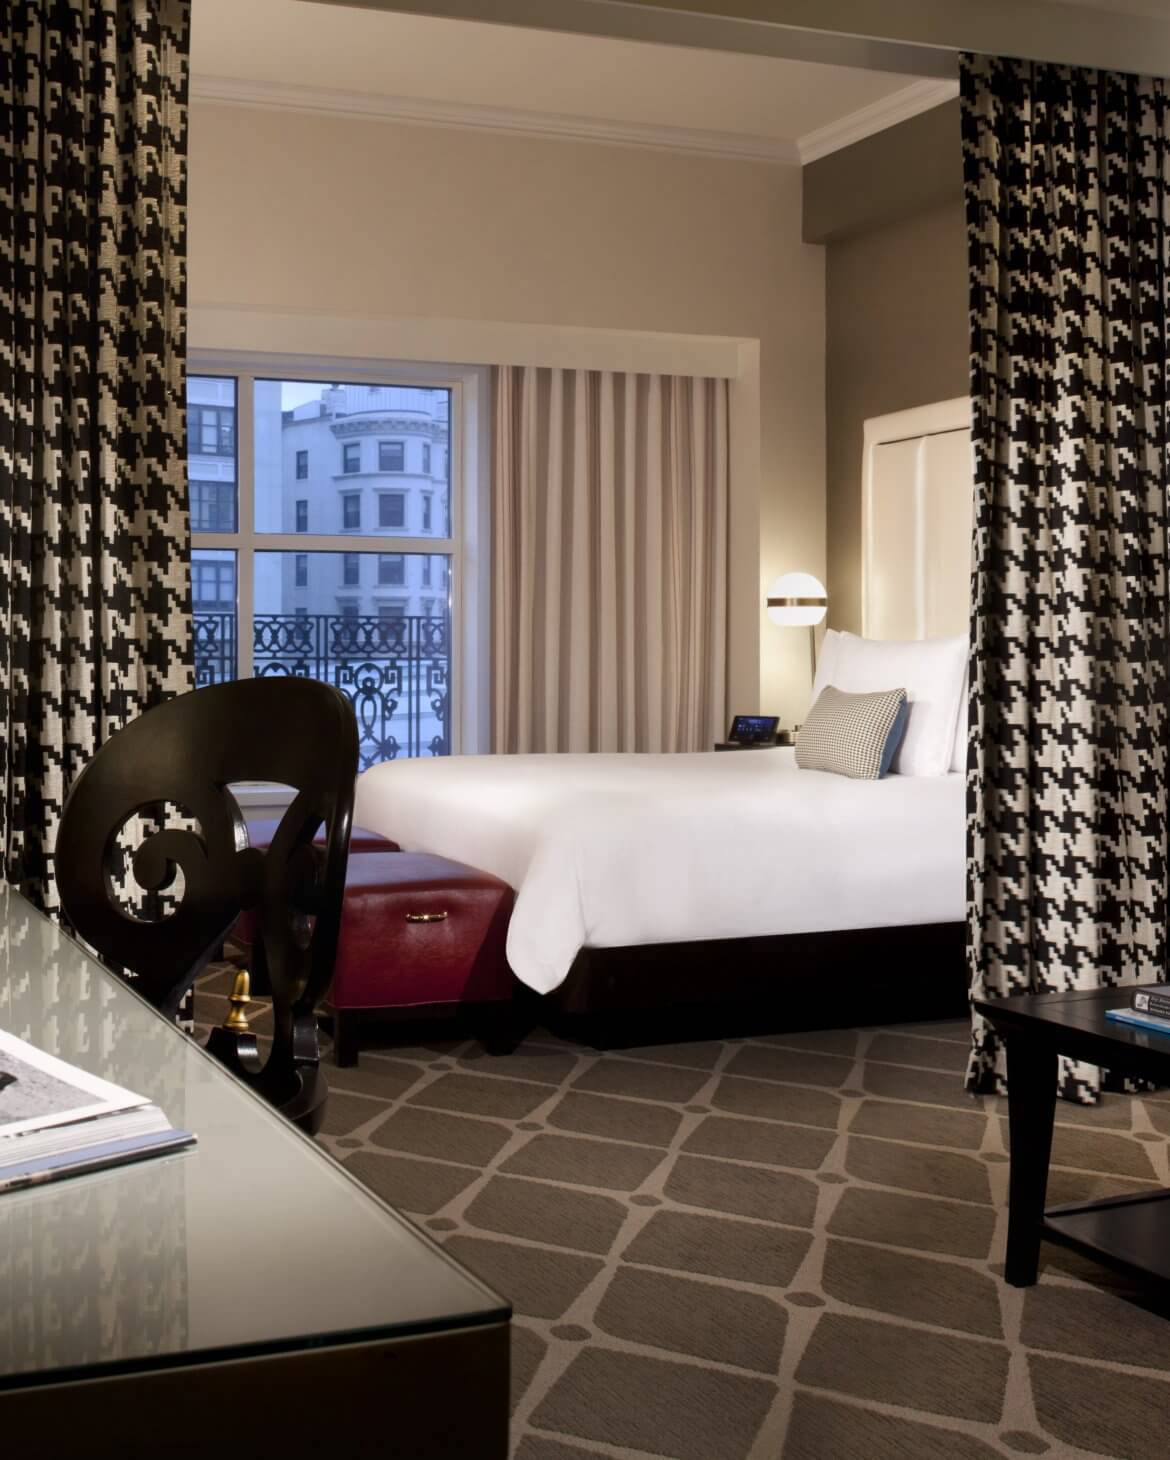 TOP 10 best hotels in Boston, Massachusetts for a comfortable stay and exploration of the city's attractions